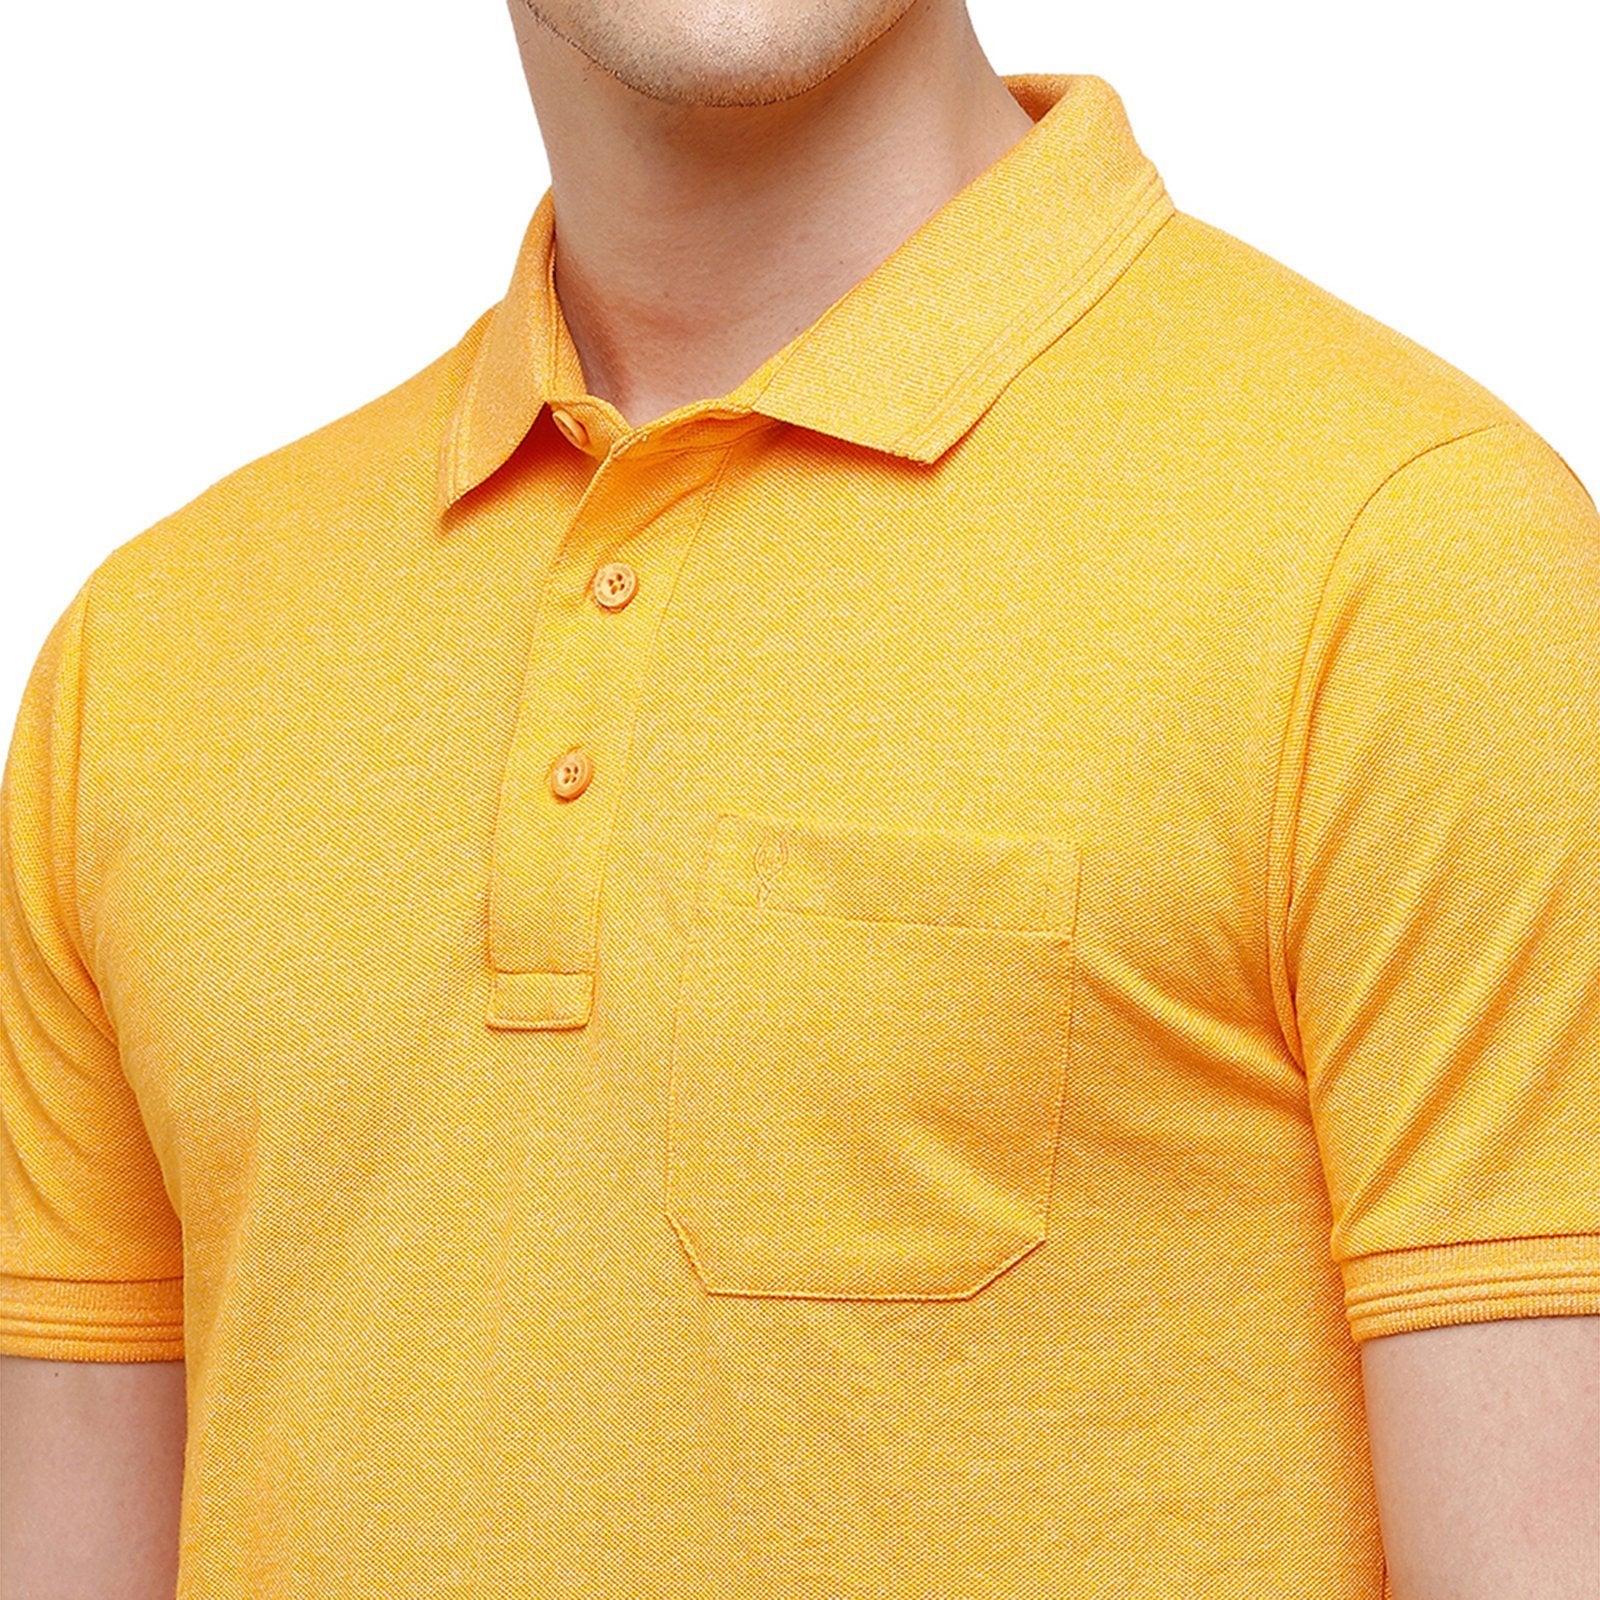 Classic polo Men's Mustard Trendy Grindle Polo Half Sleeve Slim Fit T-Shirt - Proten Mustard T-shirt Classic Polo 